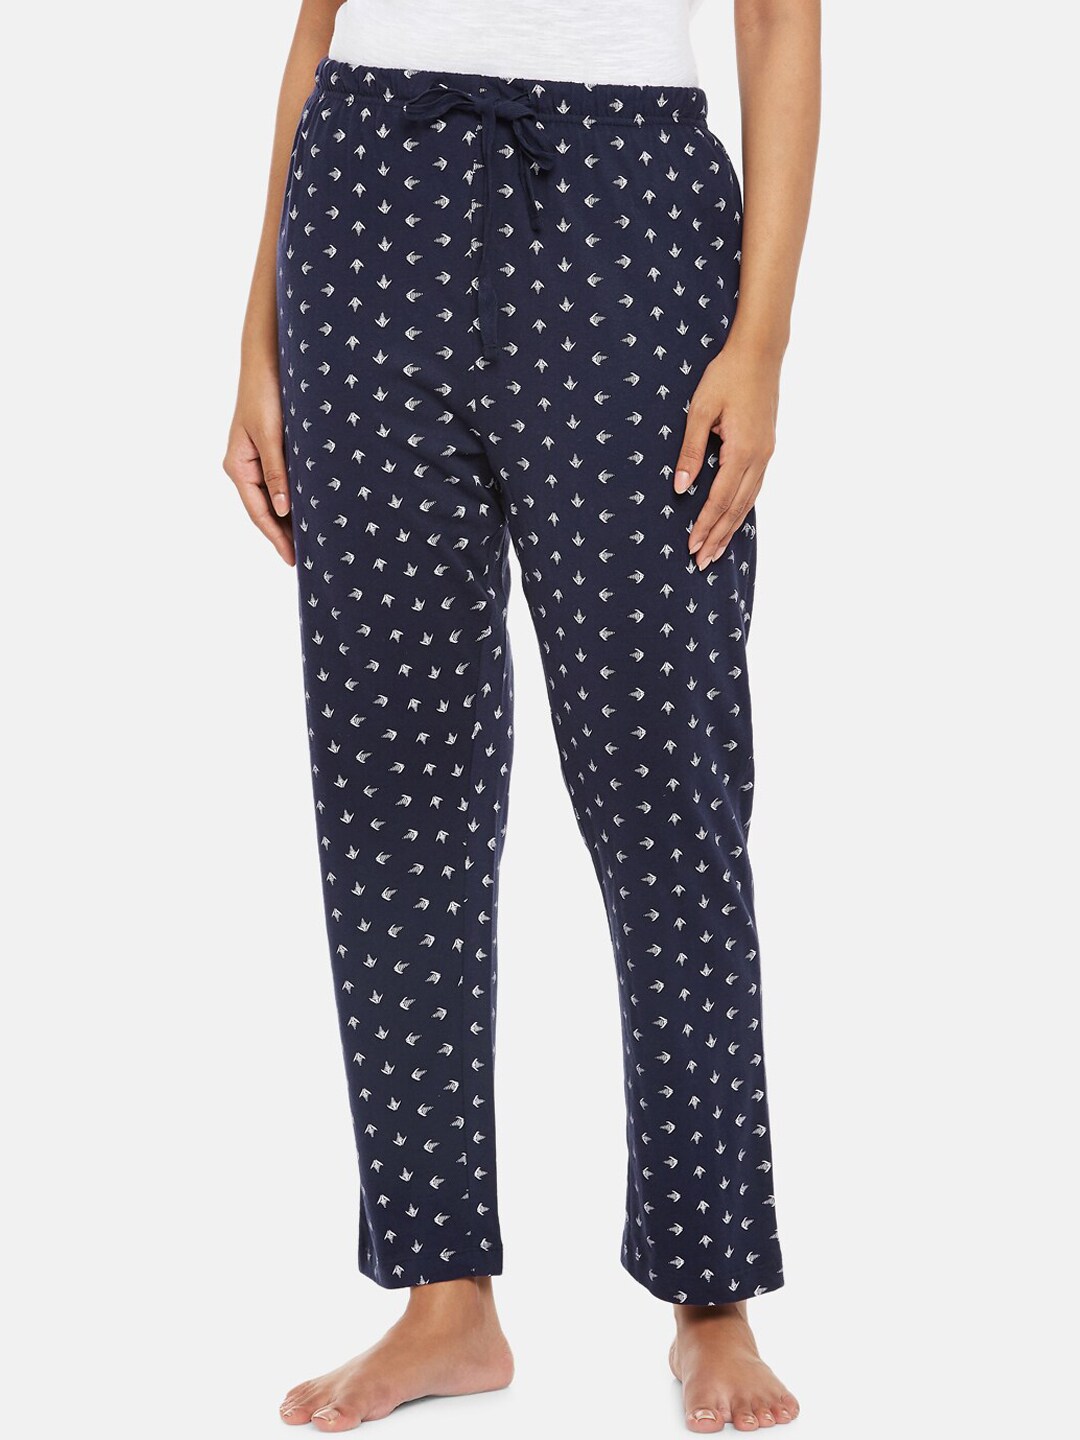 People Womens Navy Blue Printed Polka Dots Cotton Pyjama Price in India